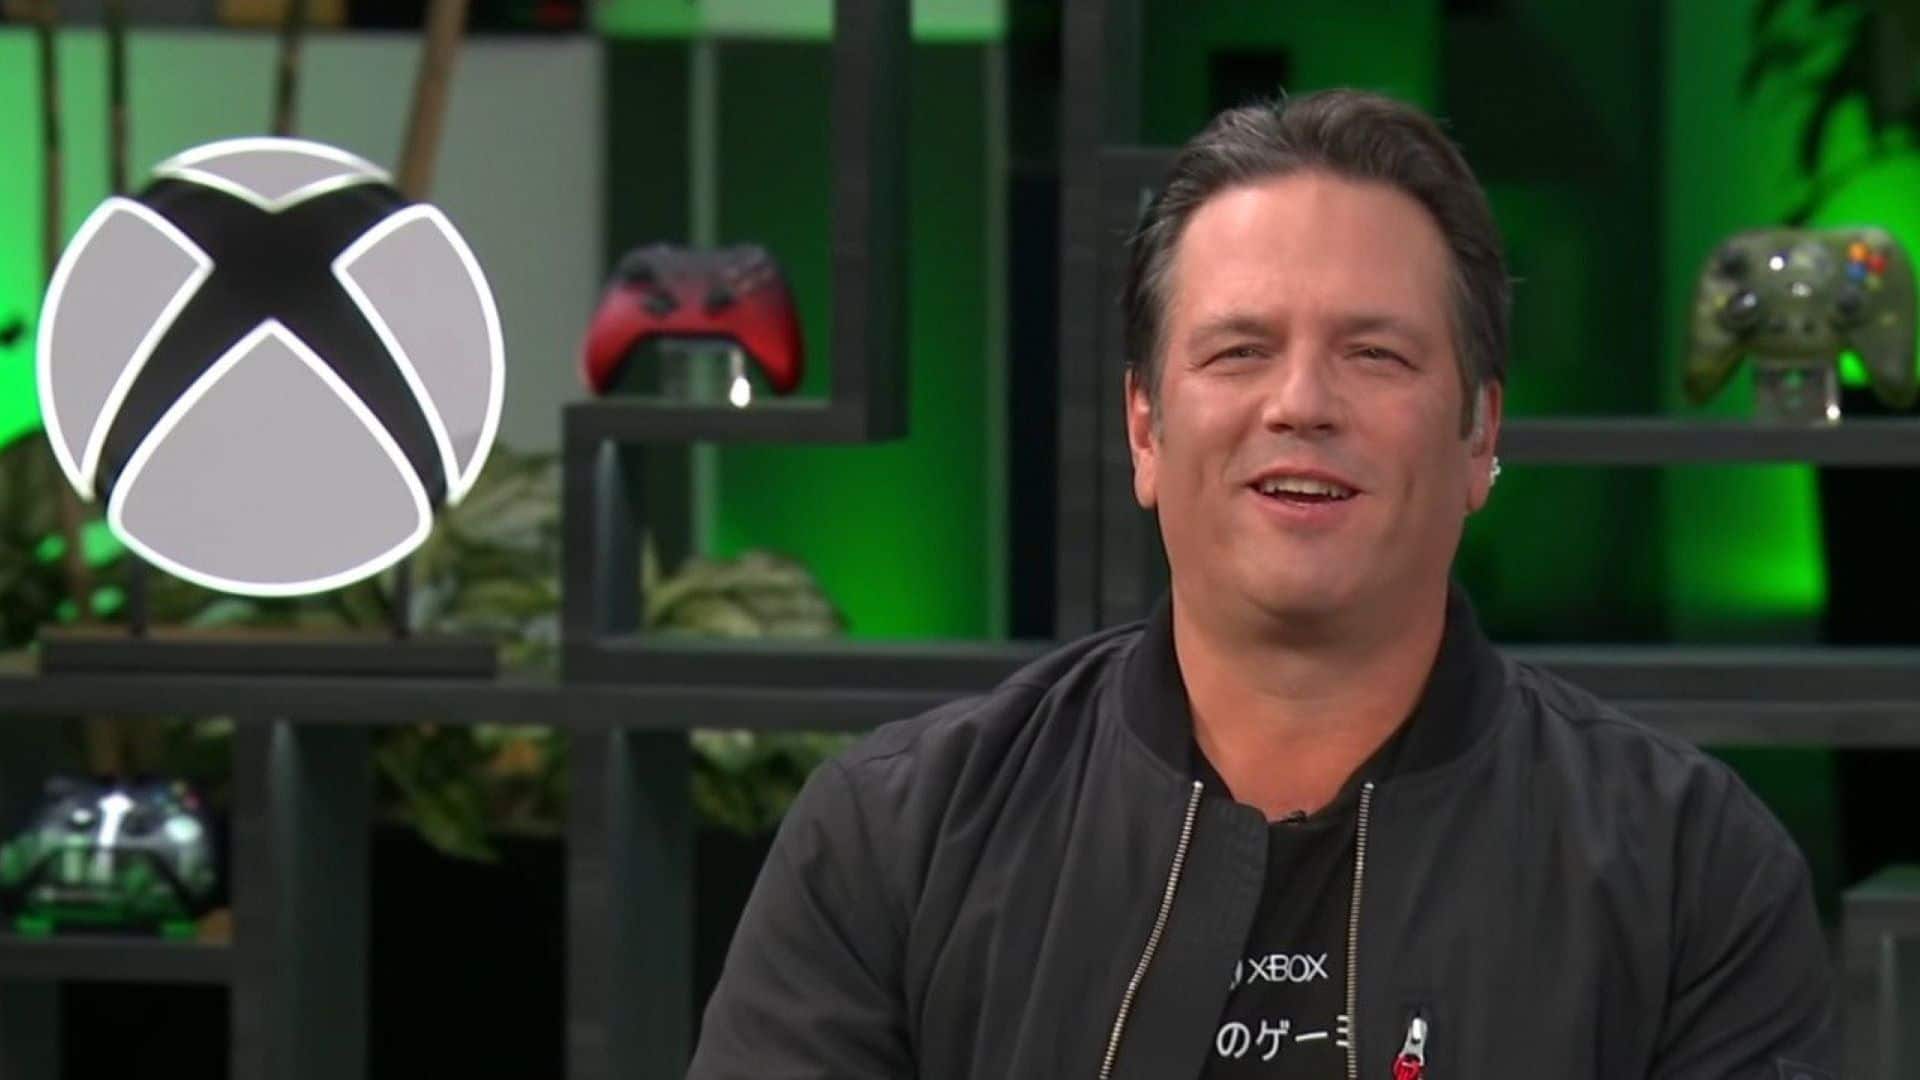 CEO Phil Spencer Confirms to Keep Call of on PlayStation"